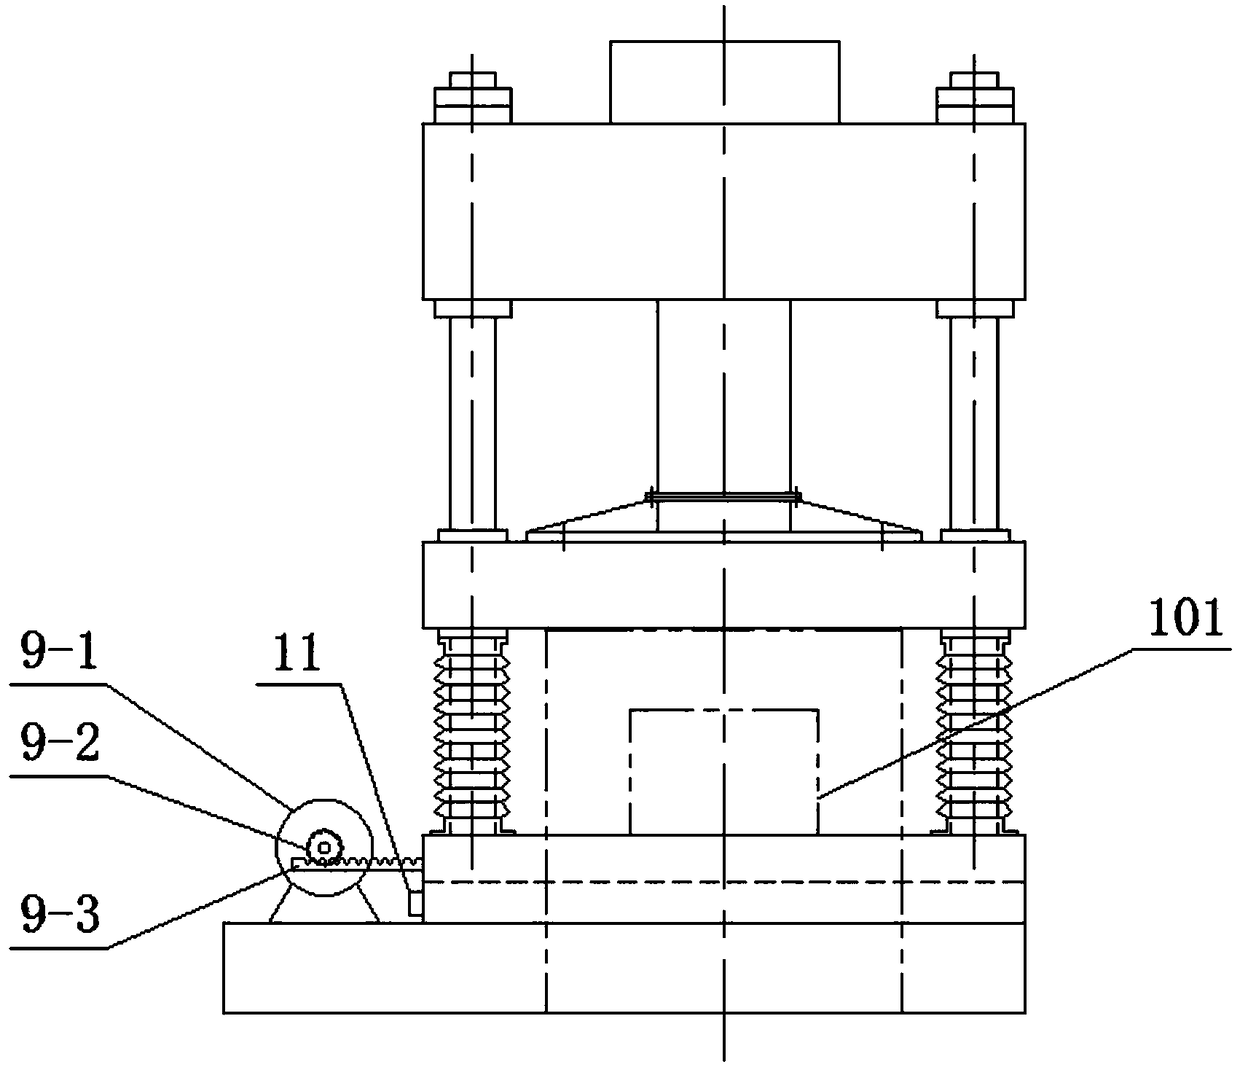 Oil press with functions of buffering, noise reduction and convenient mold mounting and dismounting